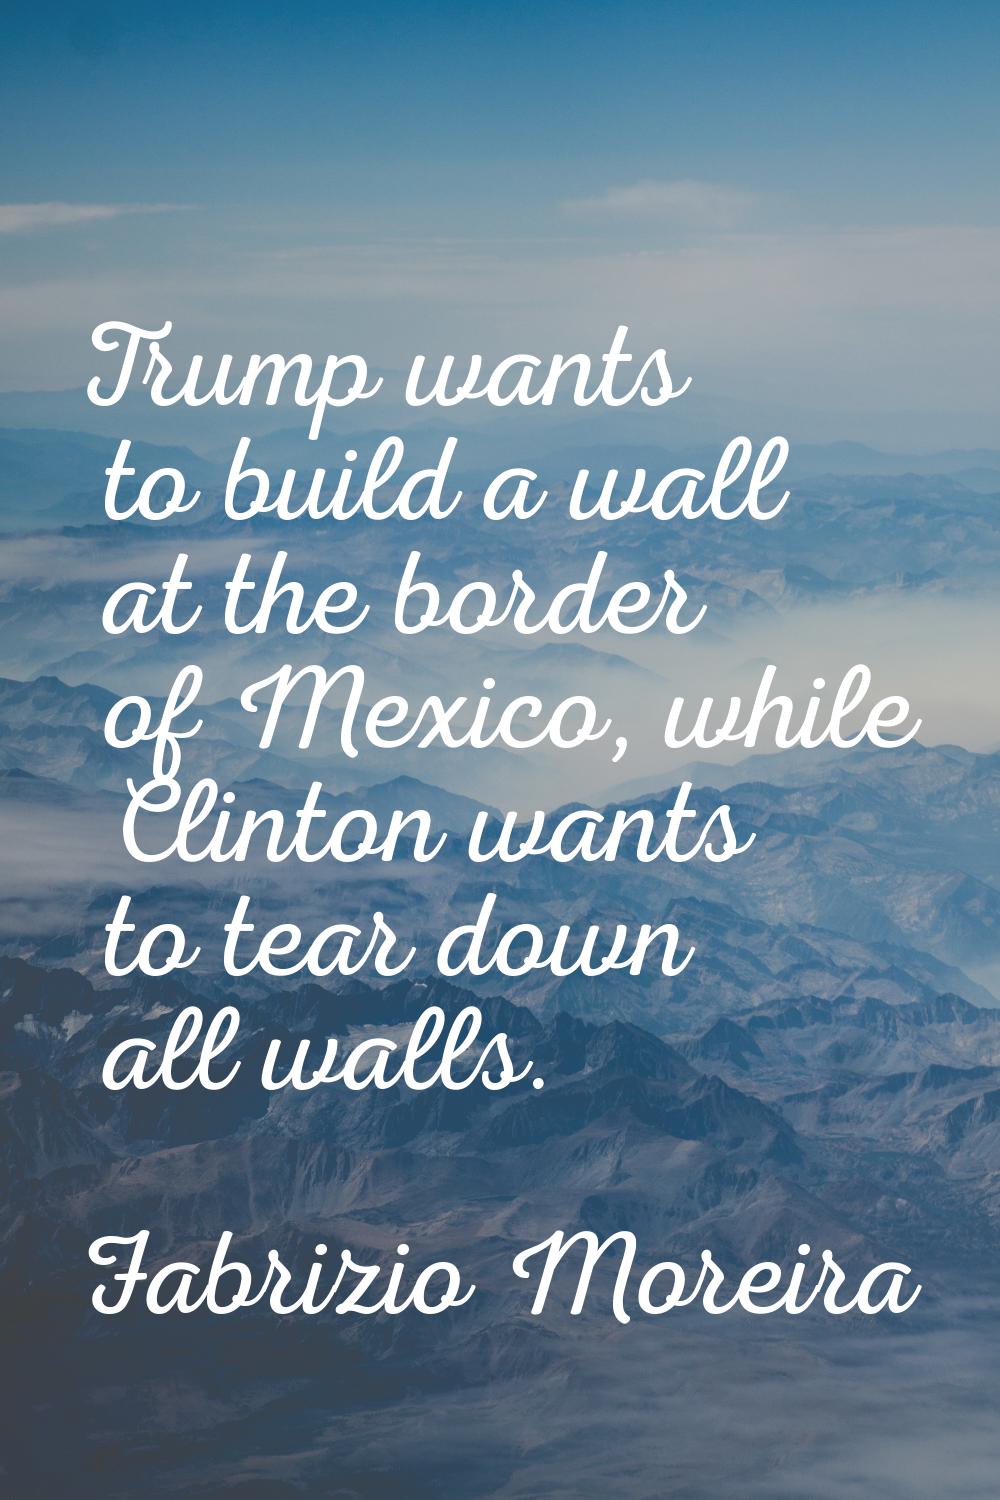 Trump wants to build a wall at the border of Mexico, while Clinton wants to tear down all walls.